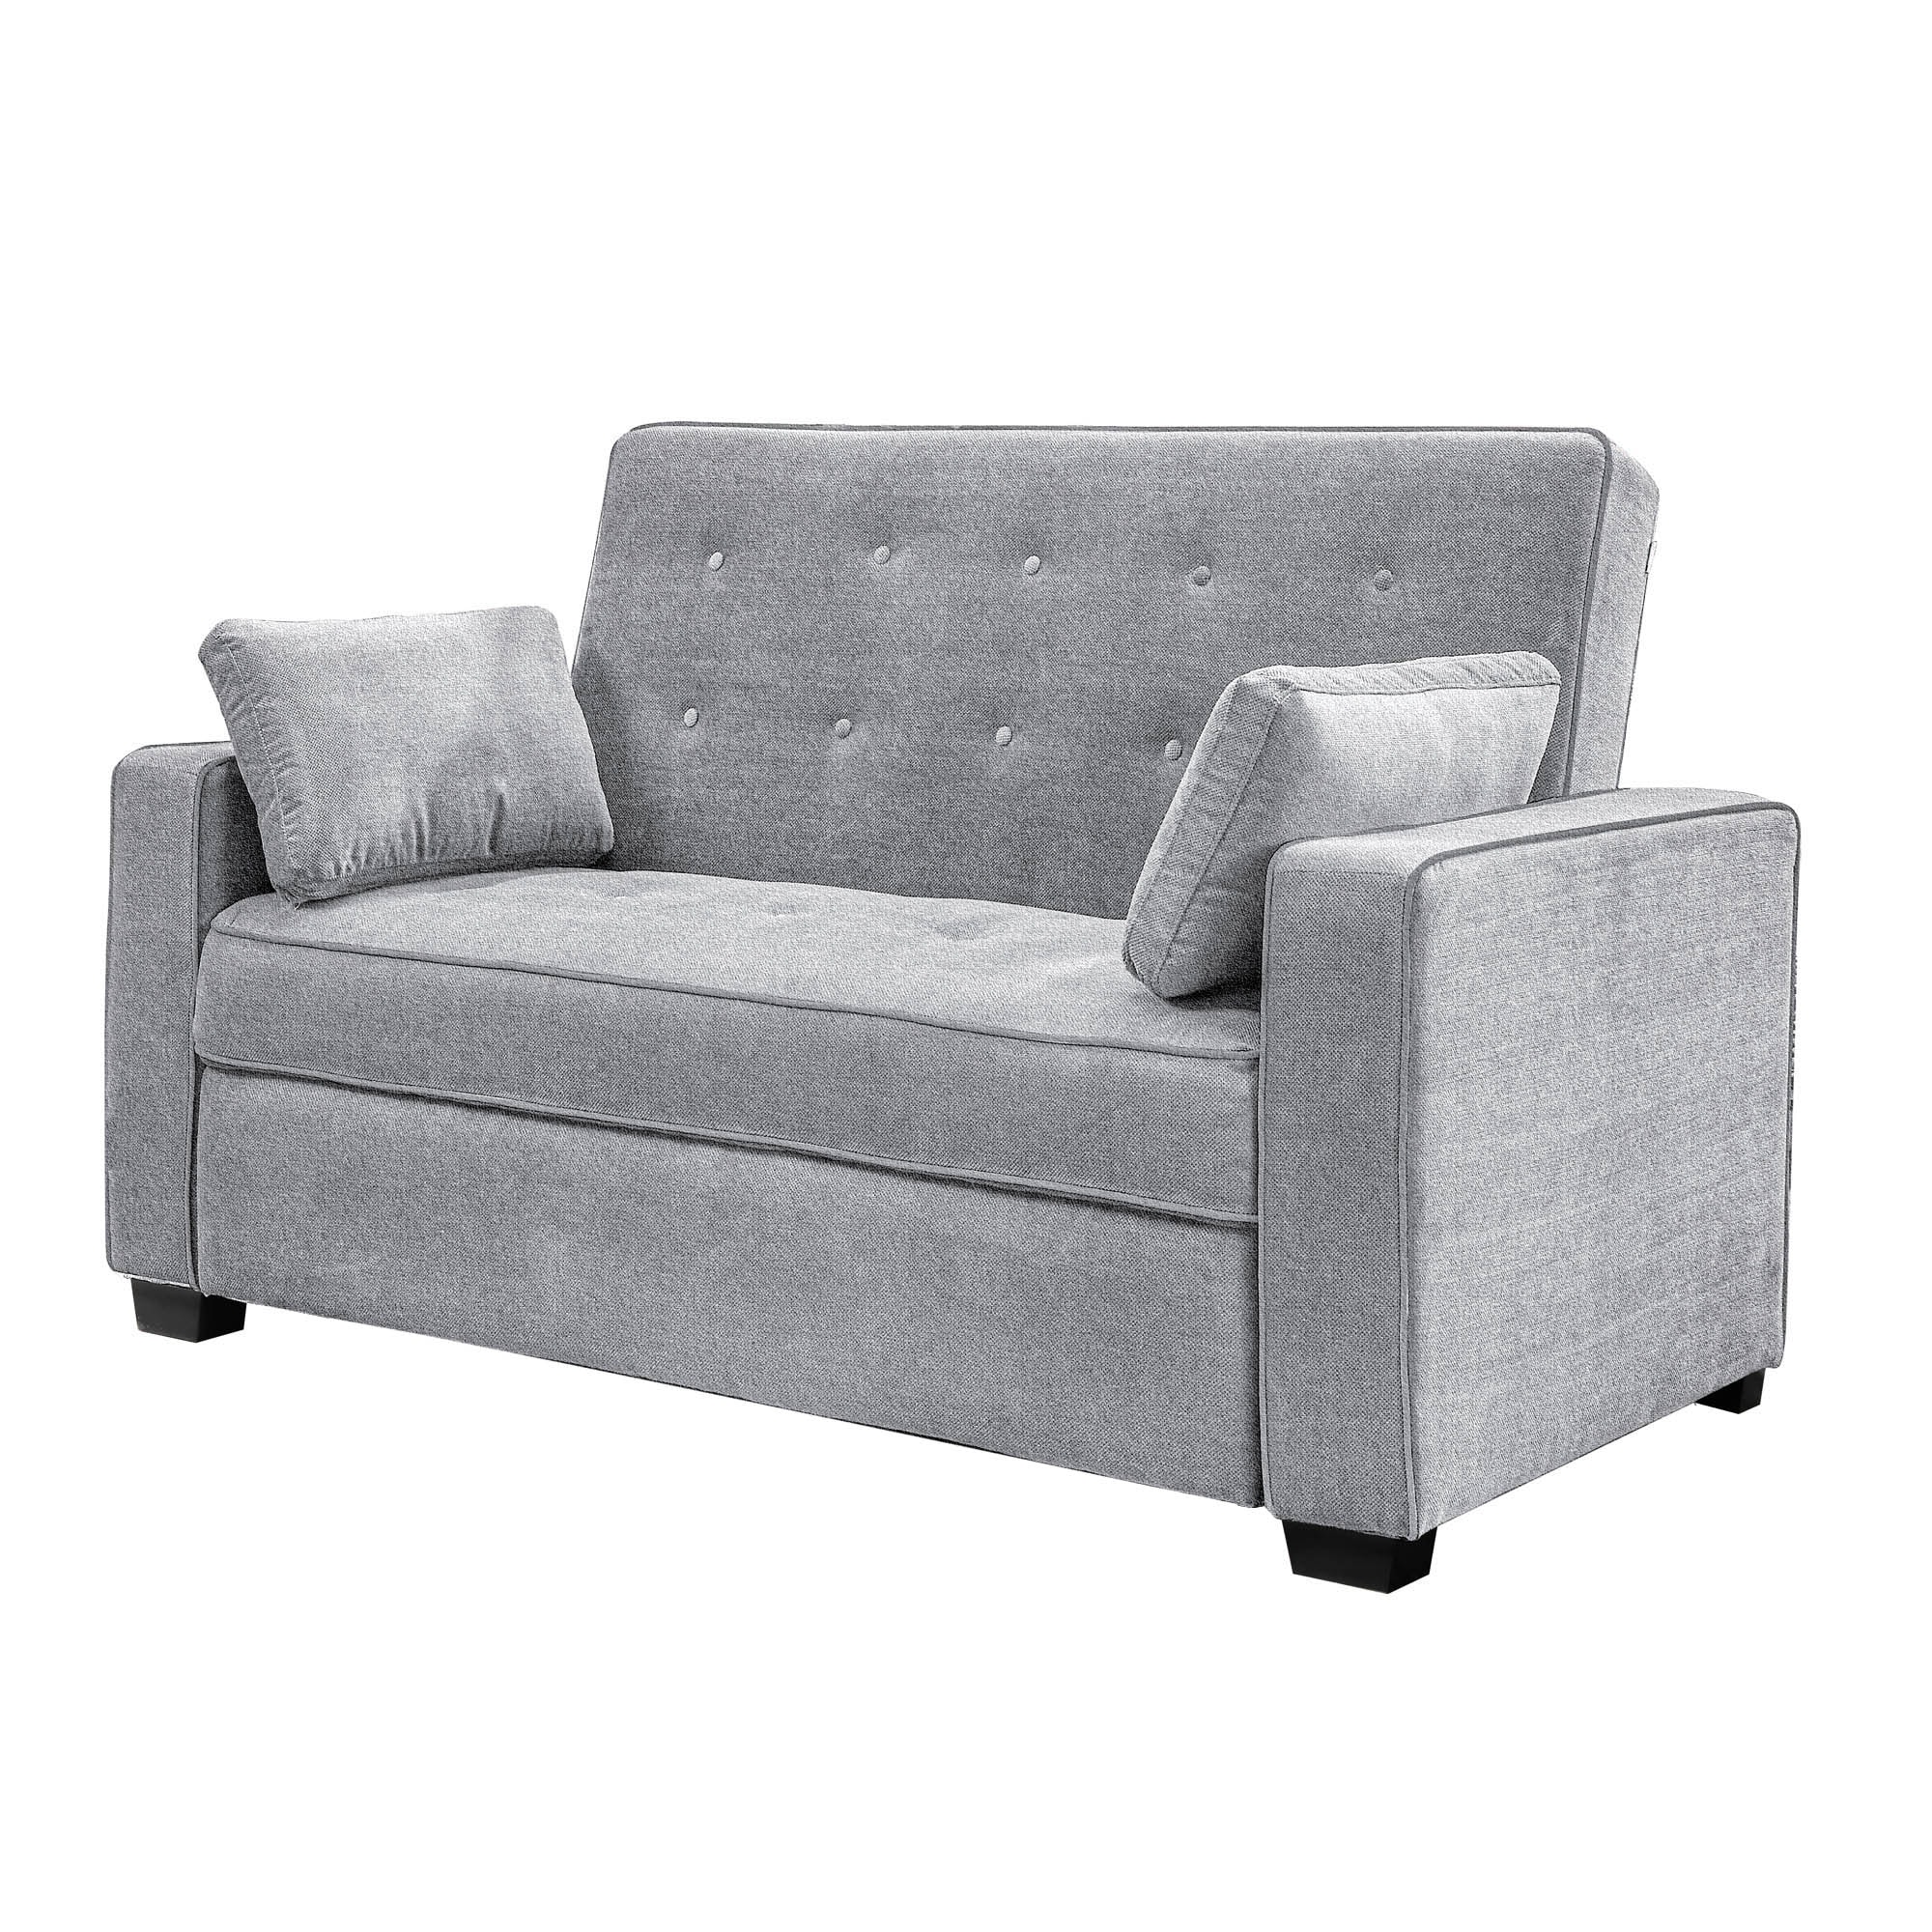 Arya Polyester/Blend Sofas 66.5-in & Couches, at 2-seater Grey in department Sofa Loveseats the Modern Light Serta